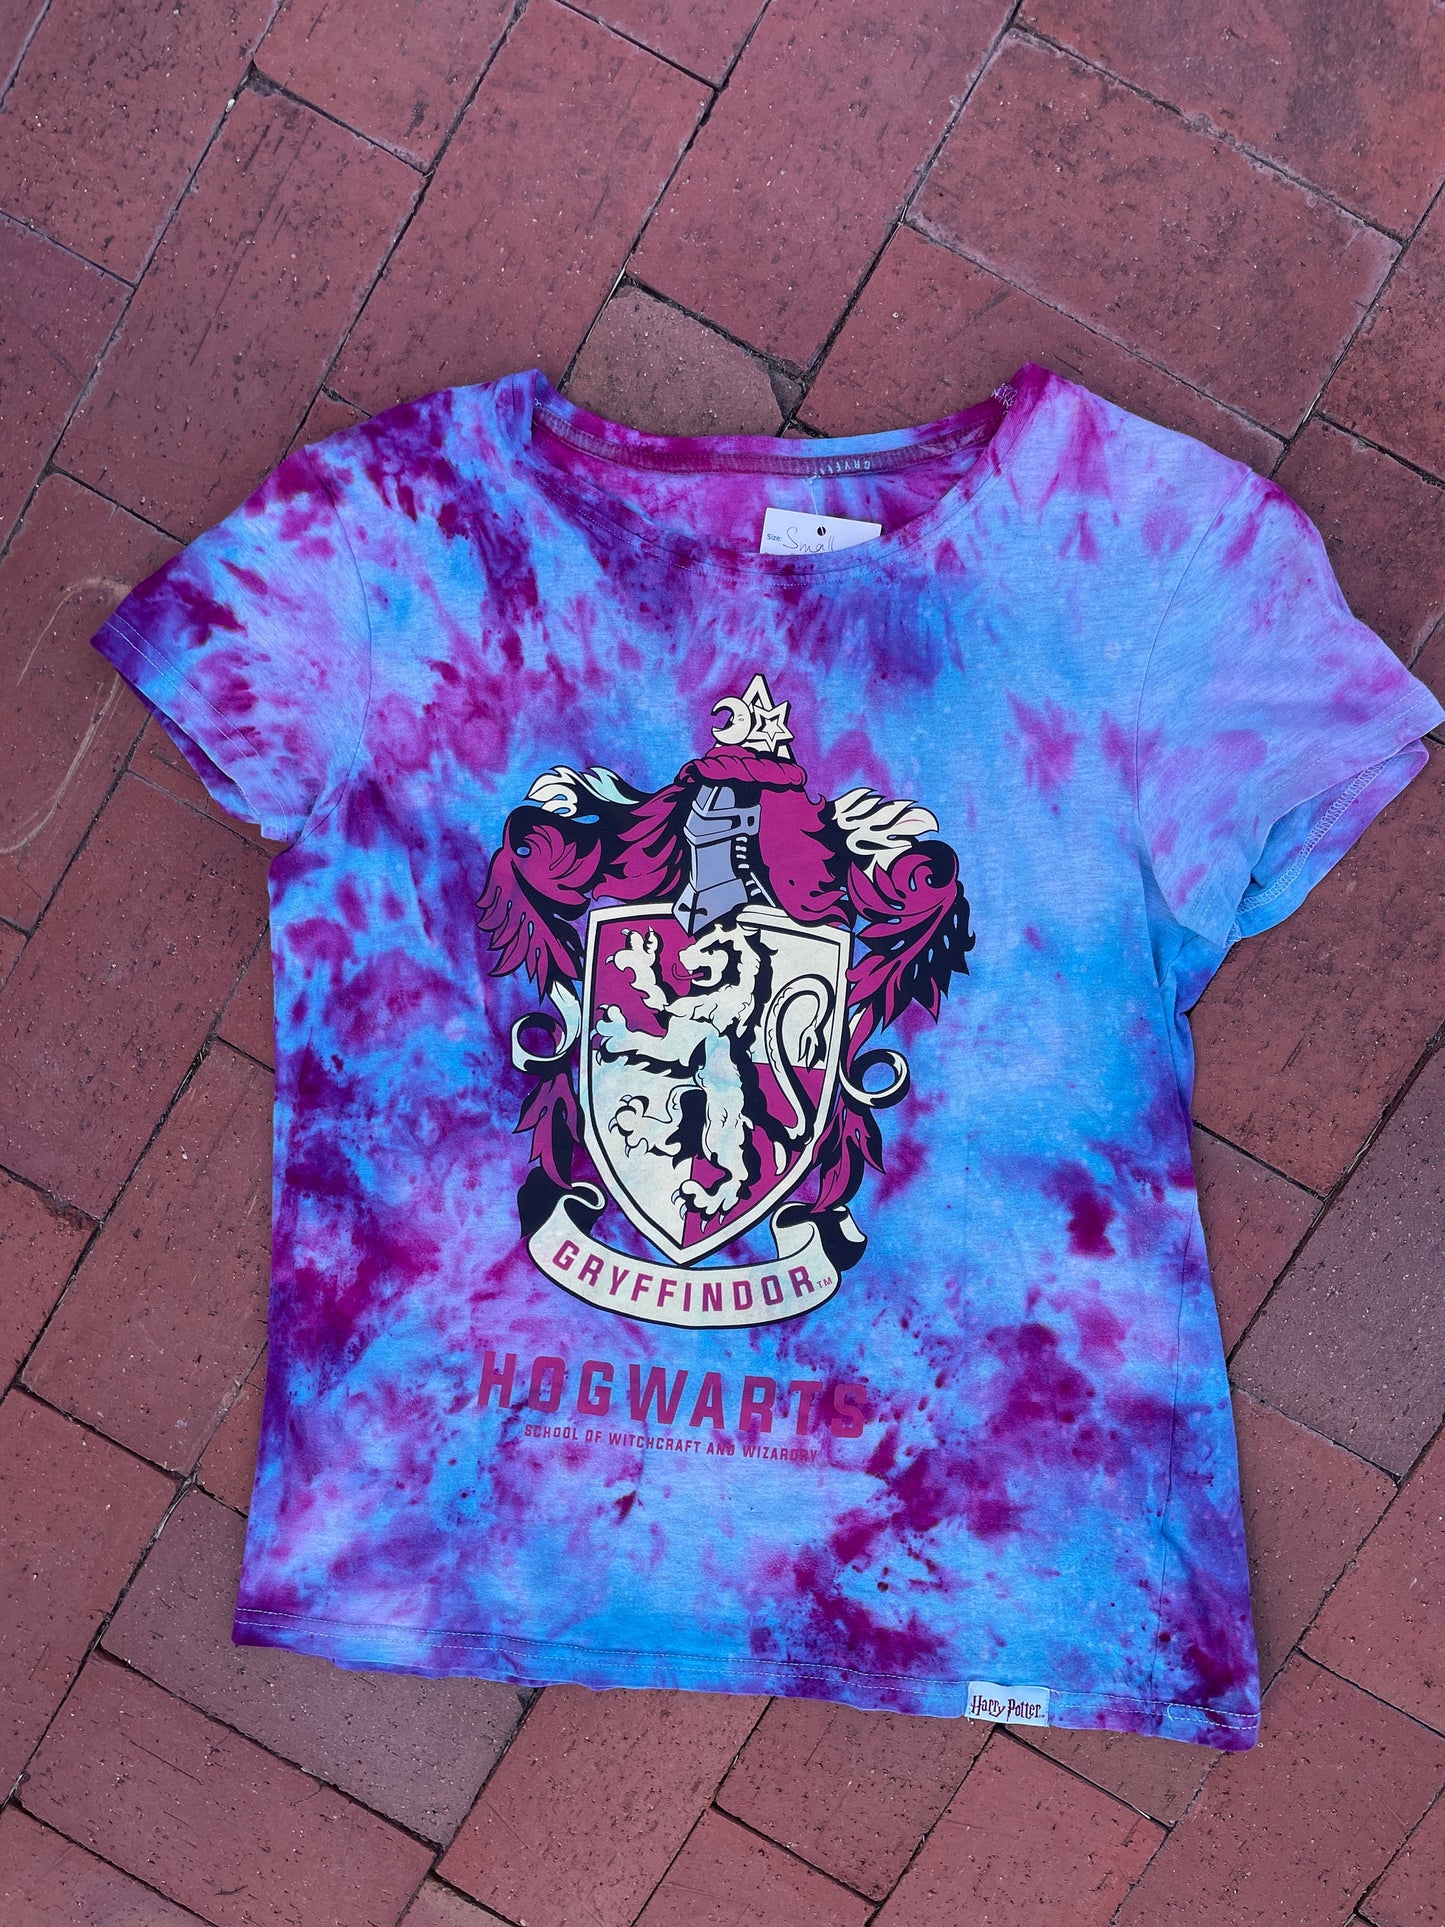 SMALL Women's Gryffindor Handmade Reverse Tie Dye Short Sleeve T-Shirt | One-Of-a-Kind Upcycled Pink and Blue Galaxy Ice Dye Top